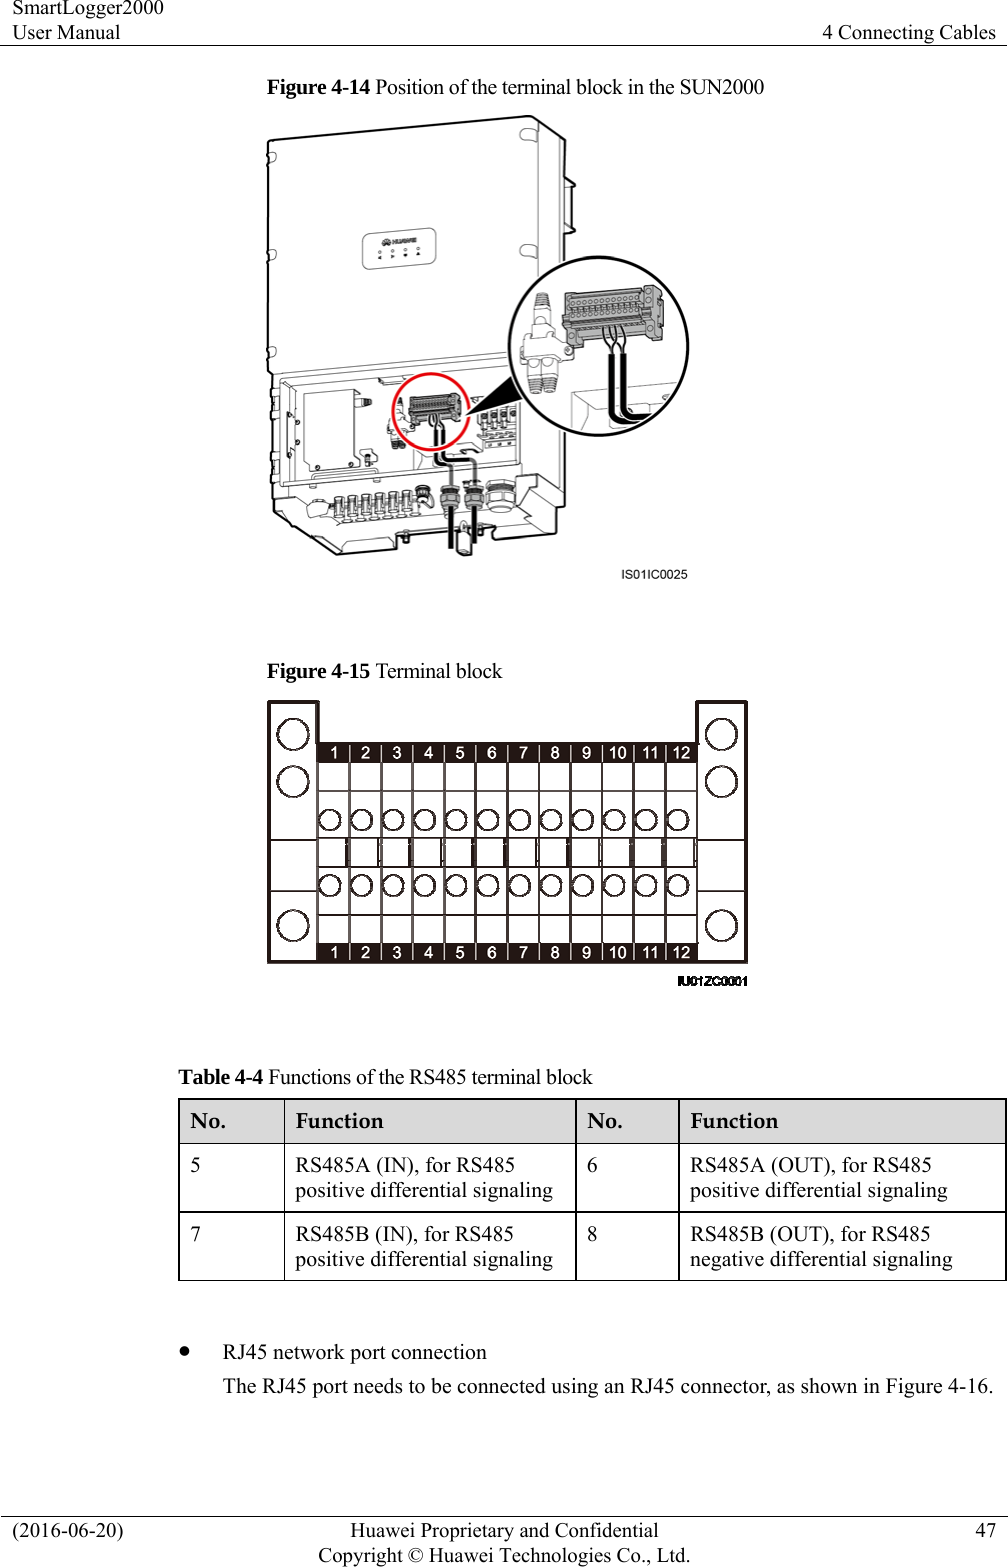 SmartLogger2000 User Manual  4 Connecting Cables (2016-06-20)  Huawei Proprietary and Confidential         Copyright © Huawei Technologies Co., Ltd.47 Figure 4-14 Position of the terminal block in the SUN2000   Figure 4-15 Terminal block   Table 4-4 Functions of the RS485 terminal block No.  Function  No.  Function 5  RS485A (IN), for RS485 positive differential signaling 6  RS485A (OUT), for RS485 positive differential signaling 7  RS485B (IN), for RS485 positive differential signaling 8  RS485B (OUT), for RS485 negative differential signaling   RJ45 network port connection The RJ45 port needs to be connected using an RJ45 connector, as shown in Figure 4-16. 